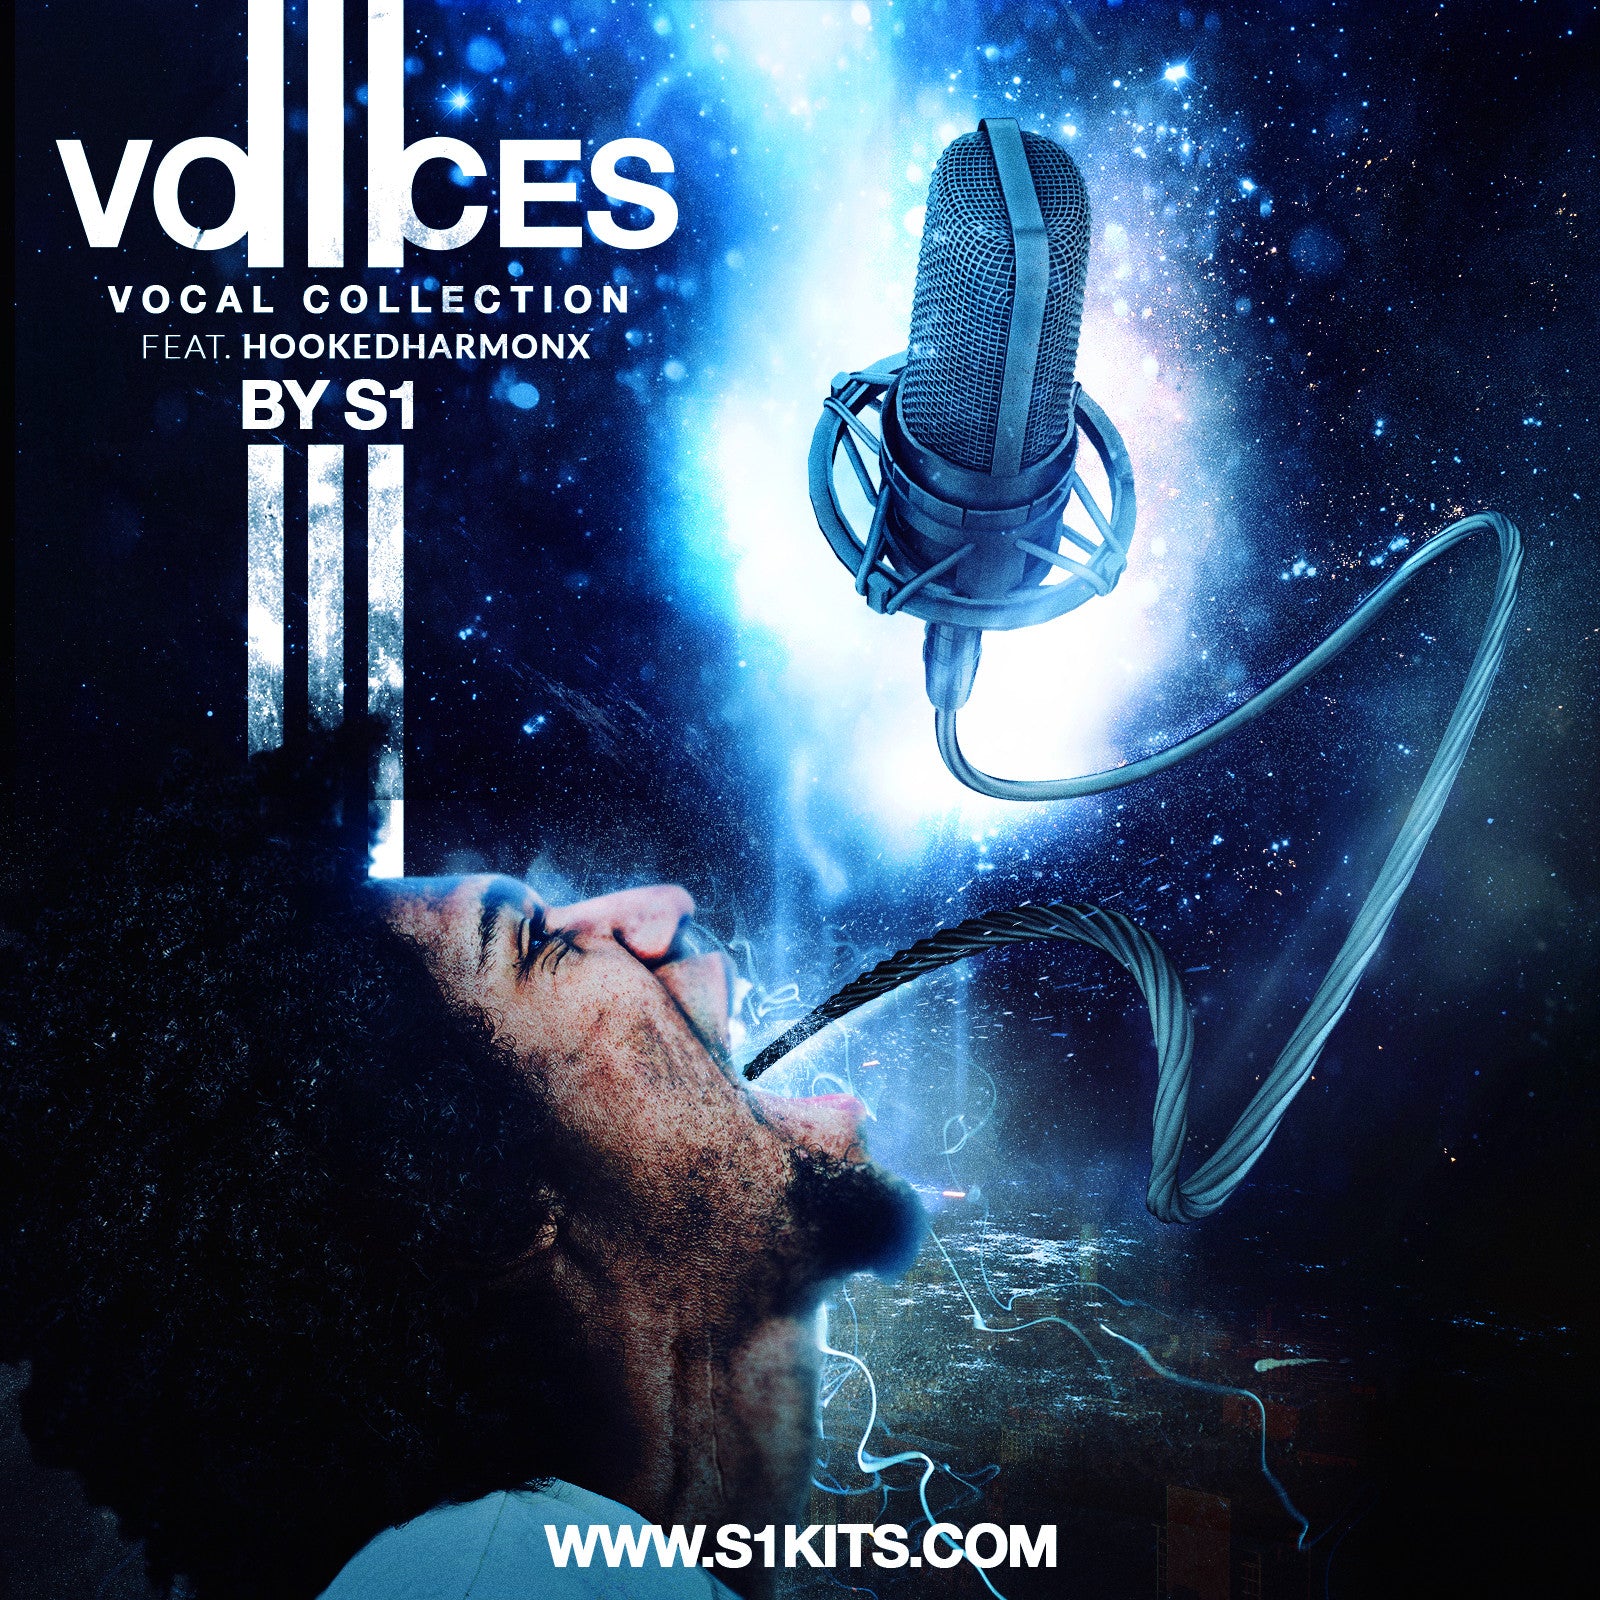 Voices III Vocal Collection by S1 feat. HookedHarmonX